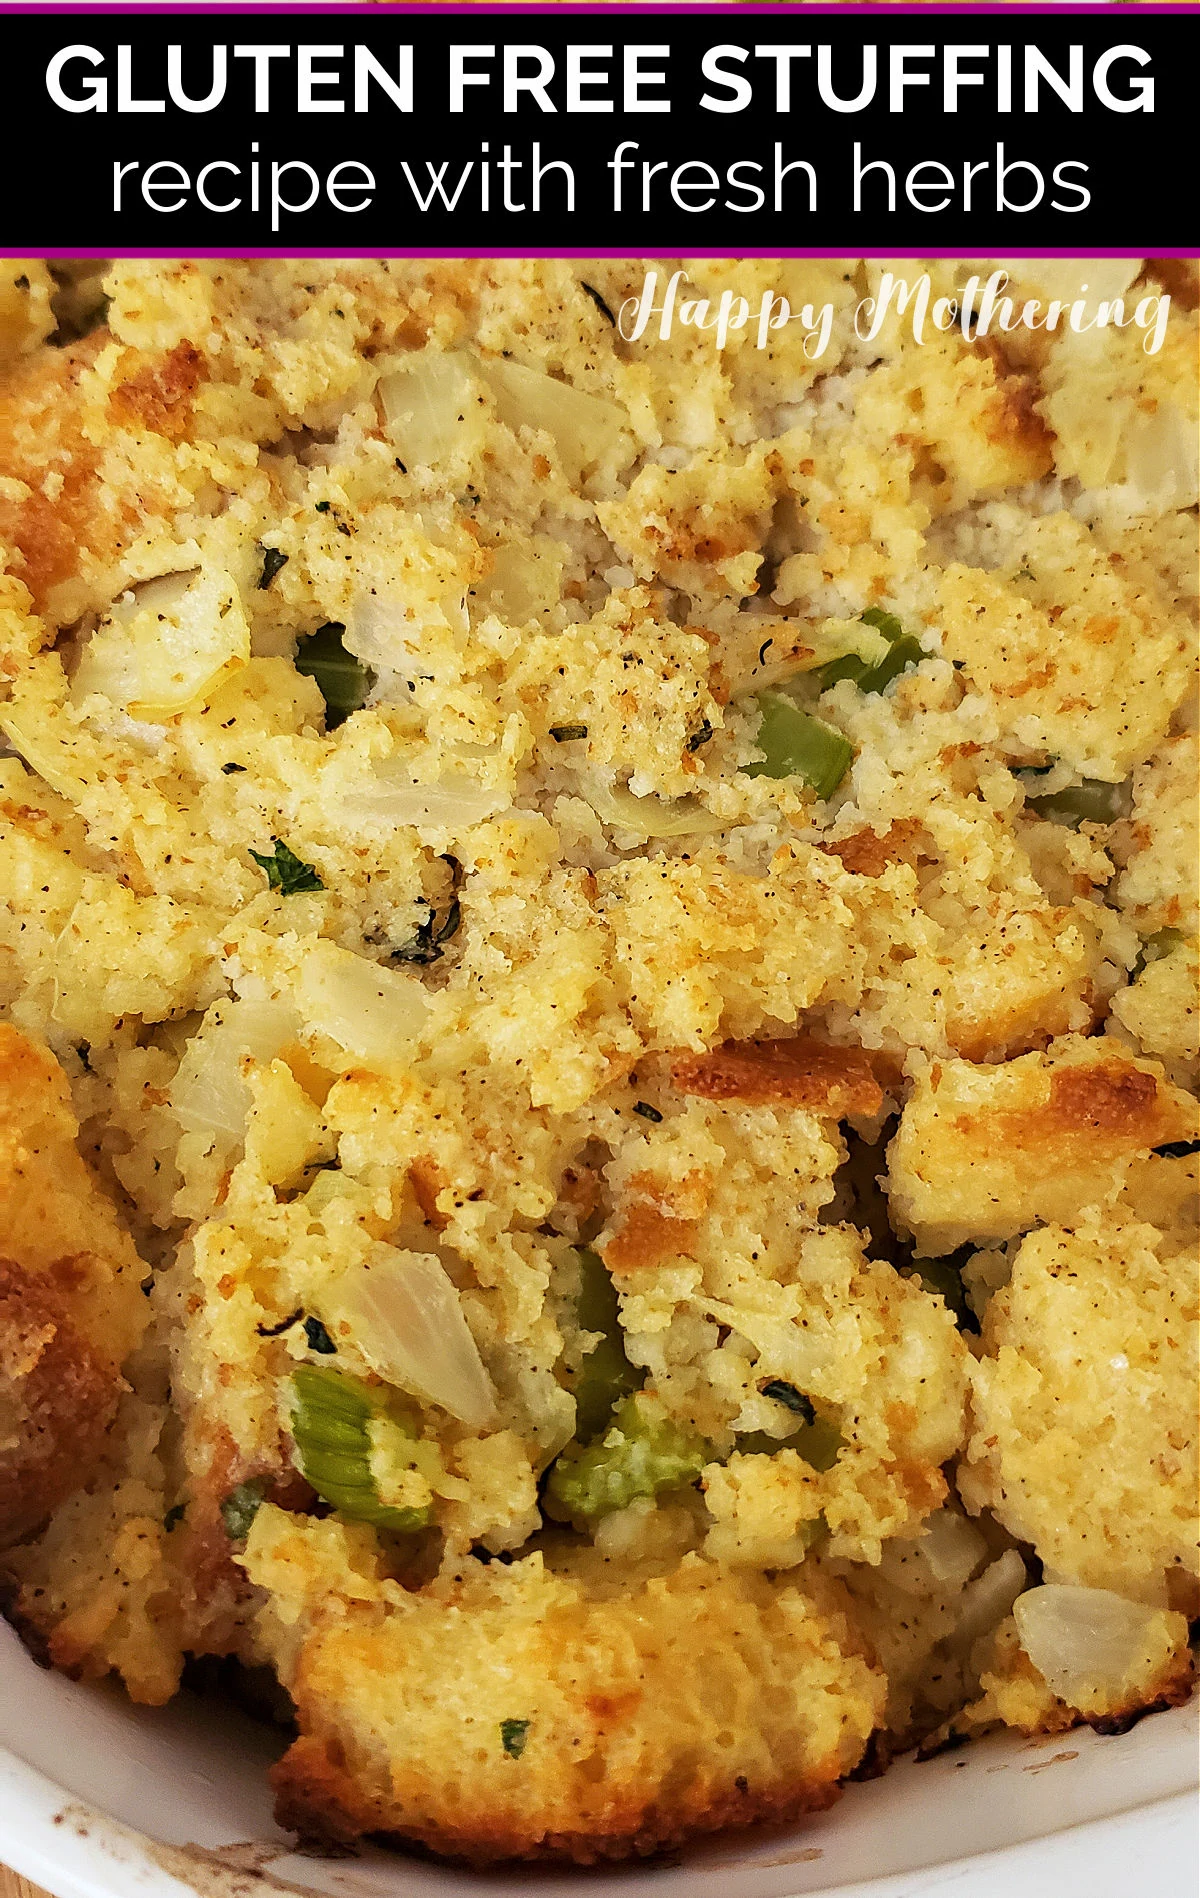 Close up of gluten free stuffing with fresh herbs.